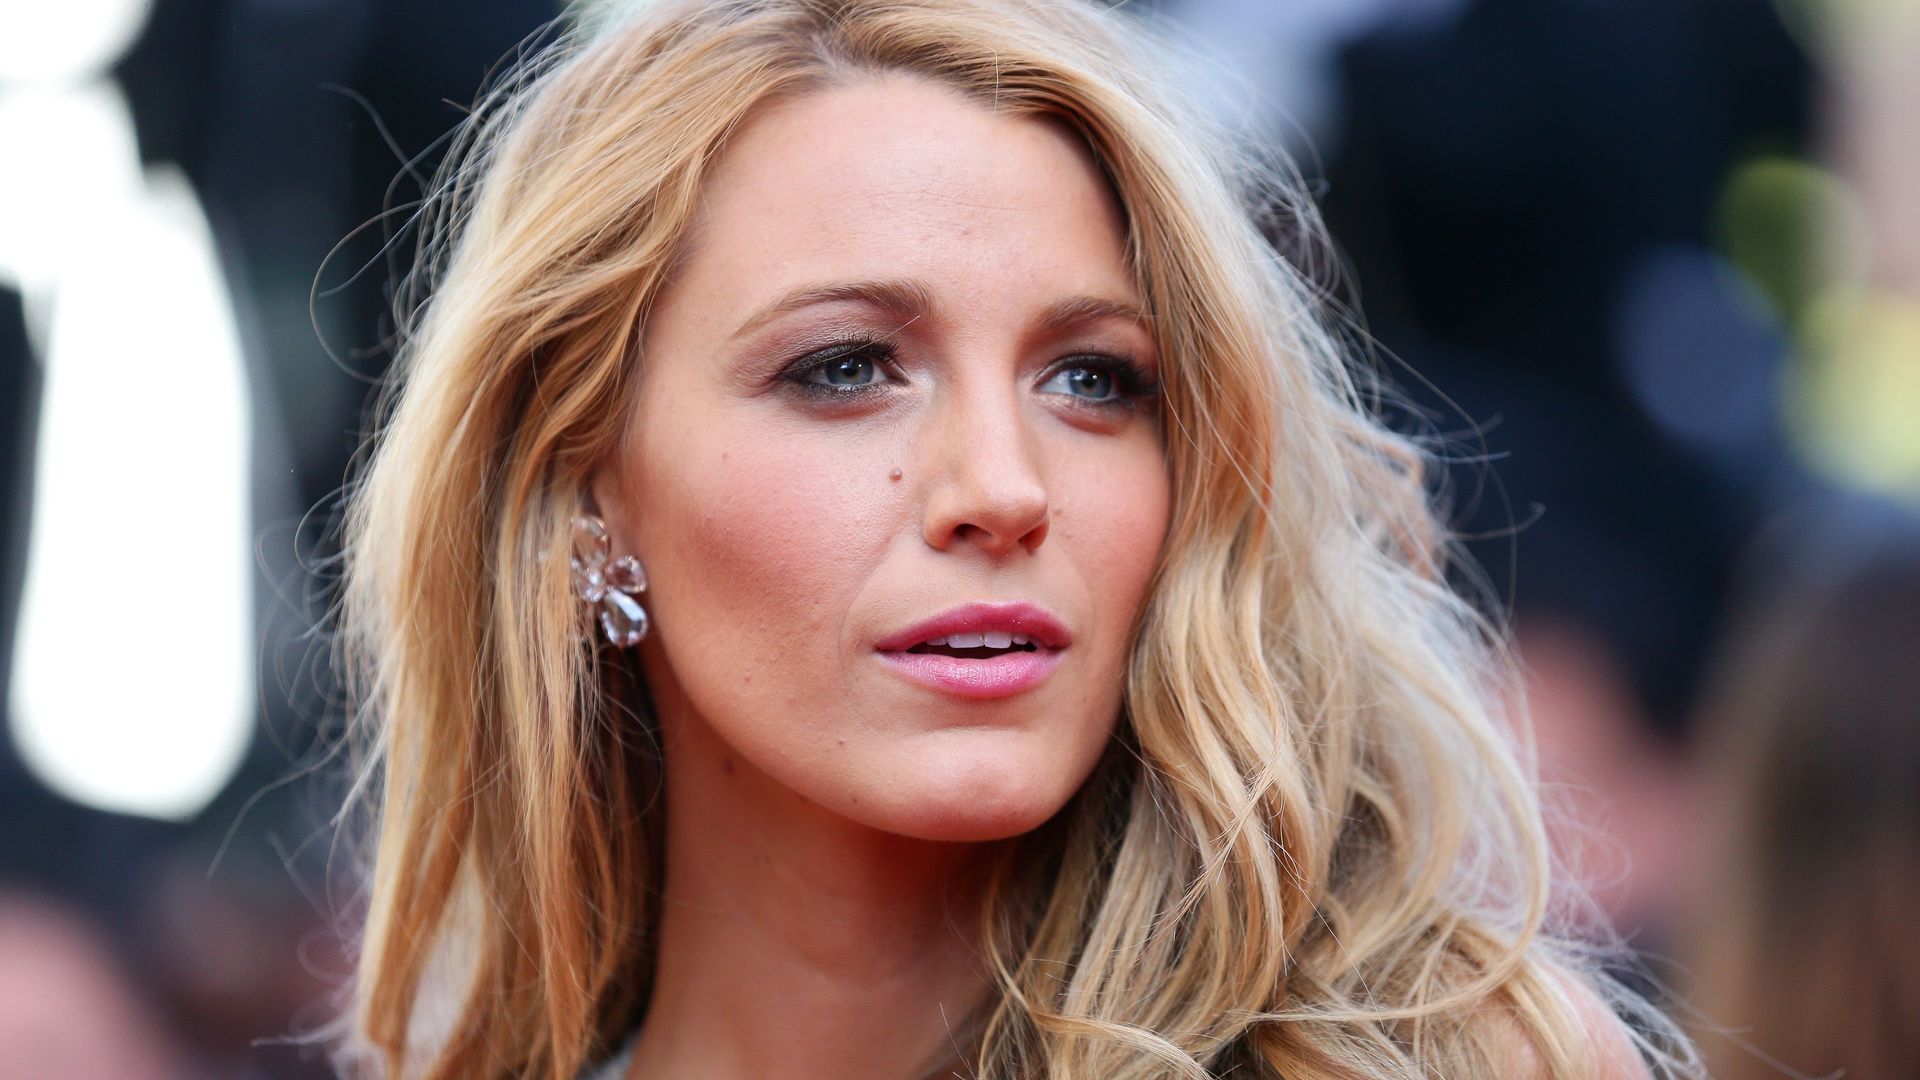 Blake Lively wows in head-turning new look during tense moment with A lister